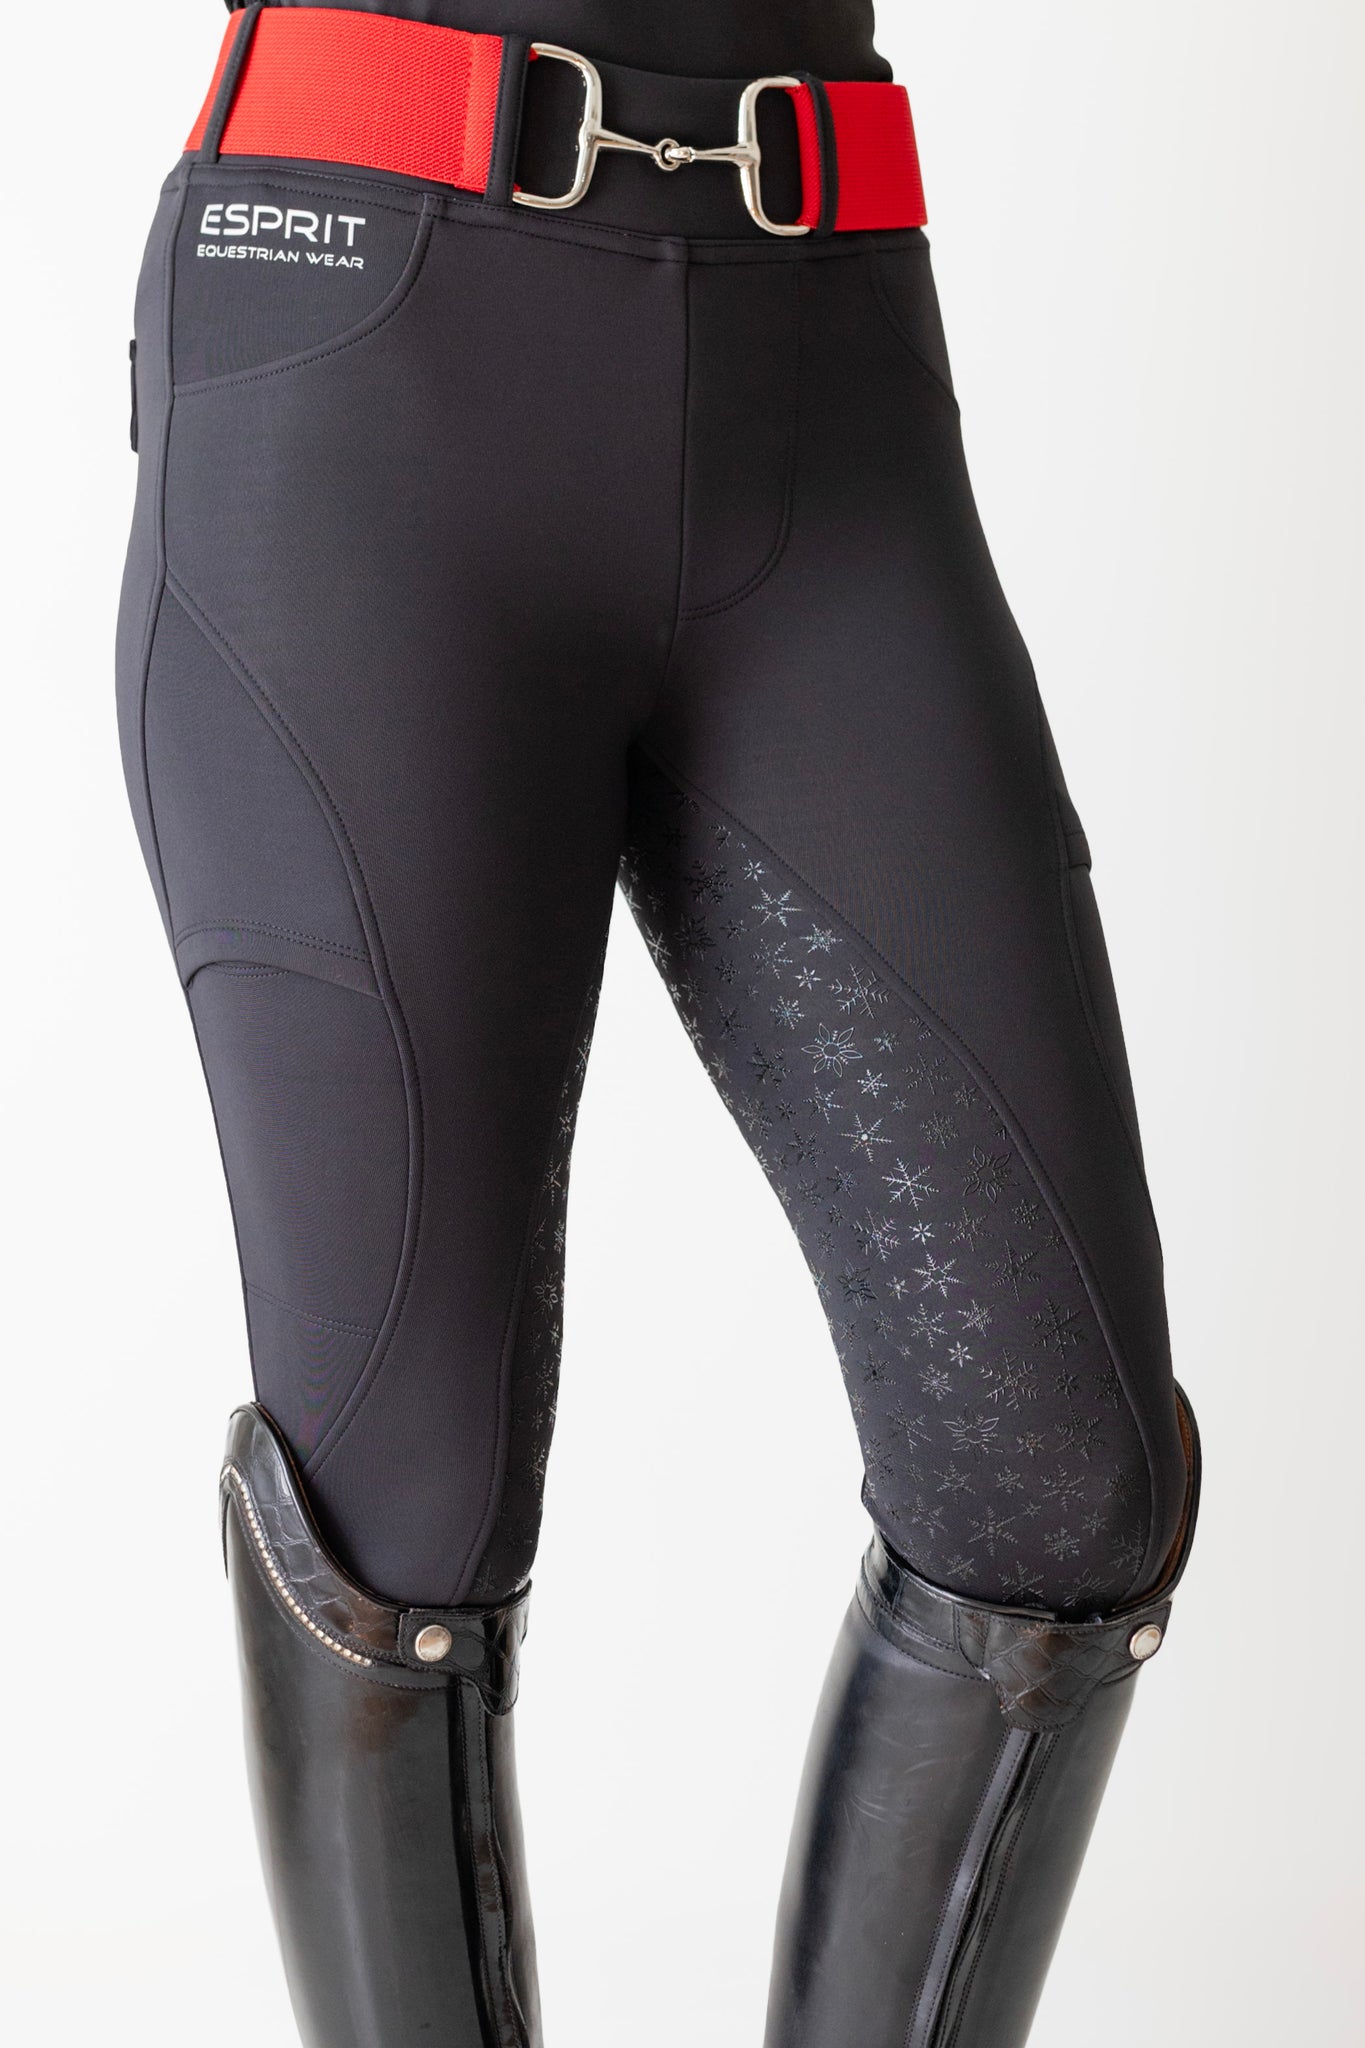 Winter Riding Tights - Scorching North